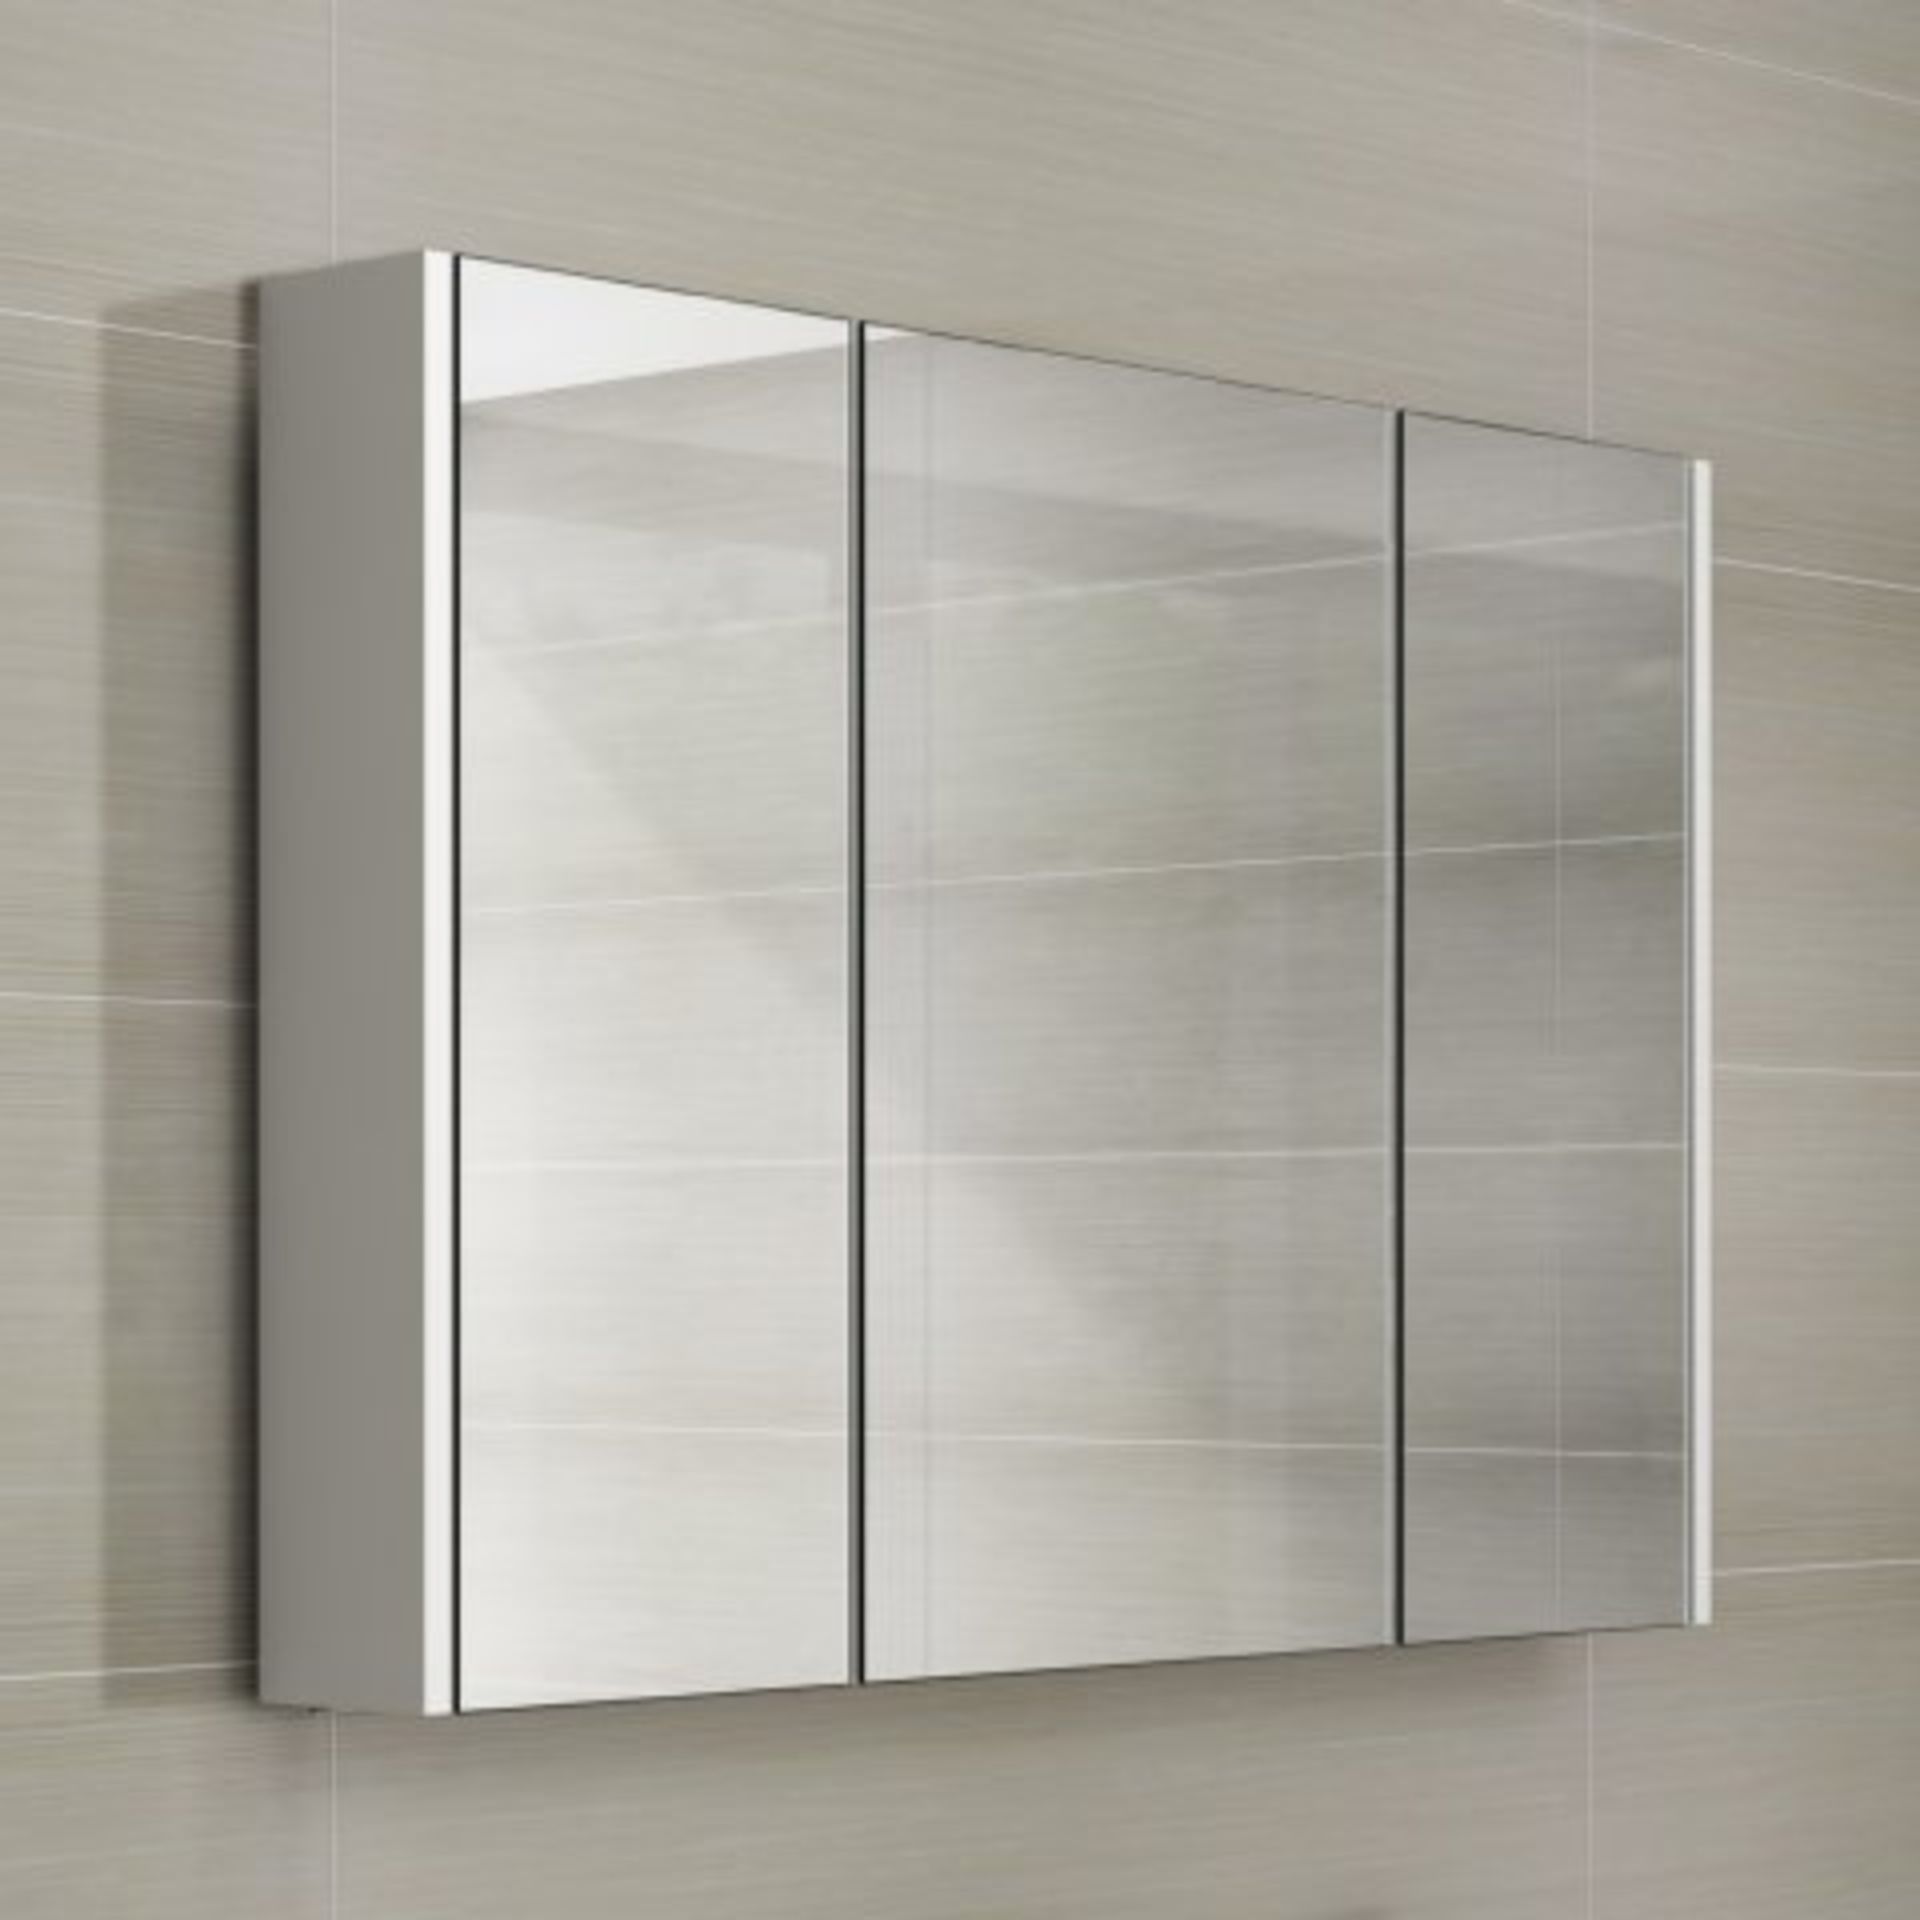 (I29) 900mm Gloss White Triple Door Mirror Cabinet. RRP £299.99. Reflection Perfection The